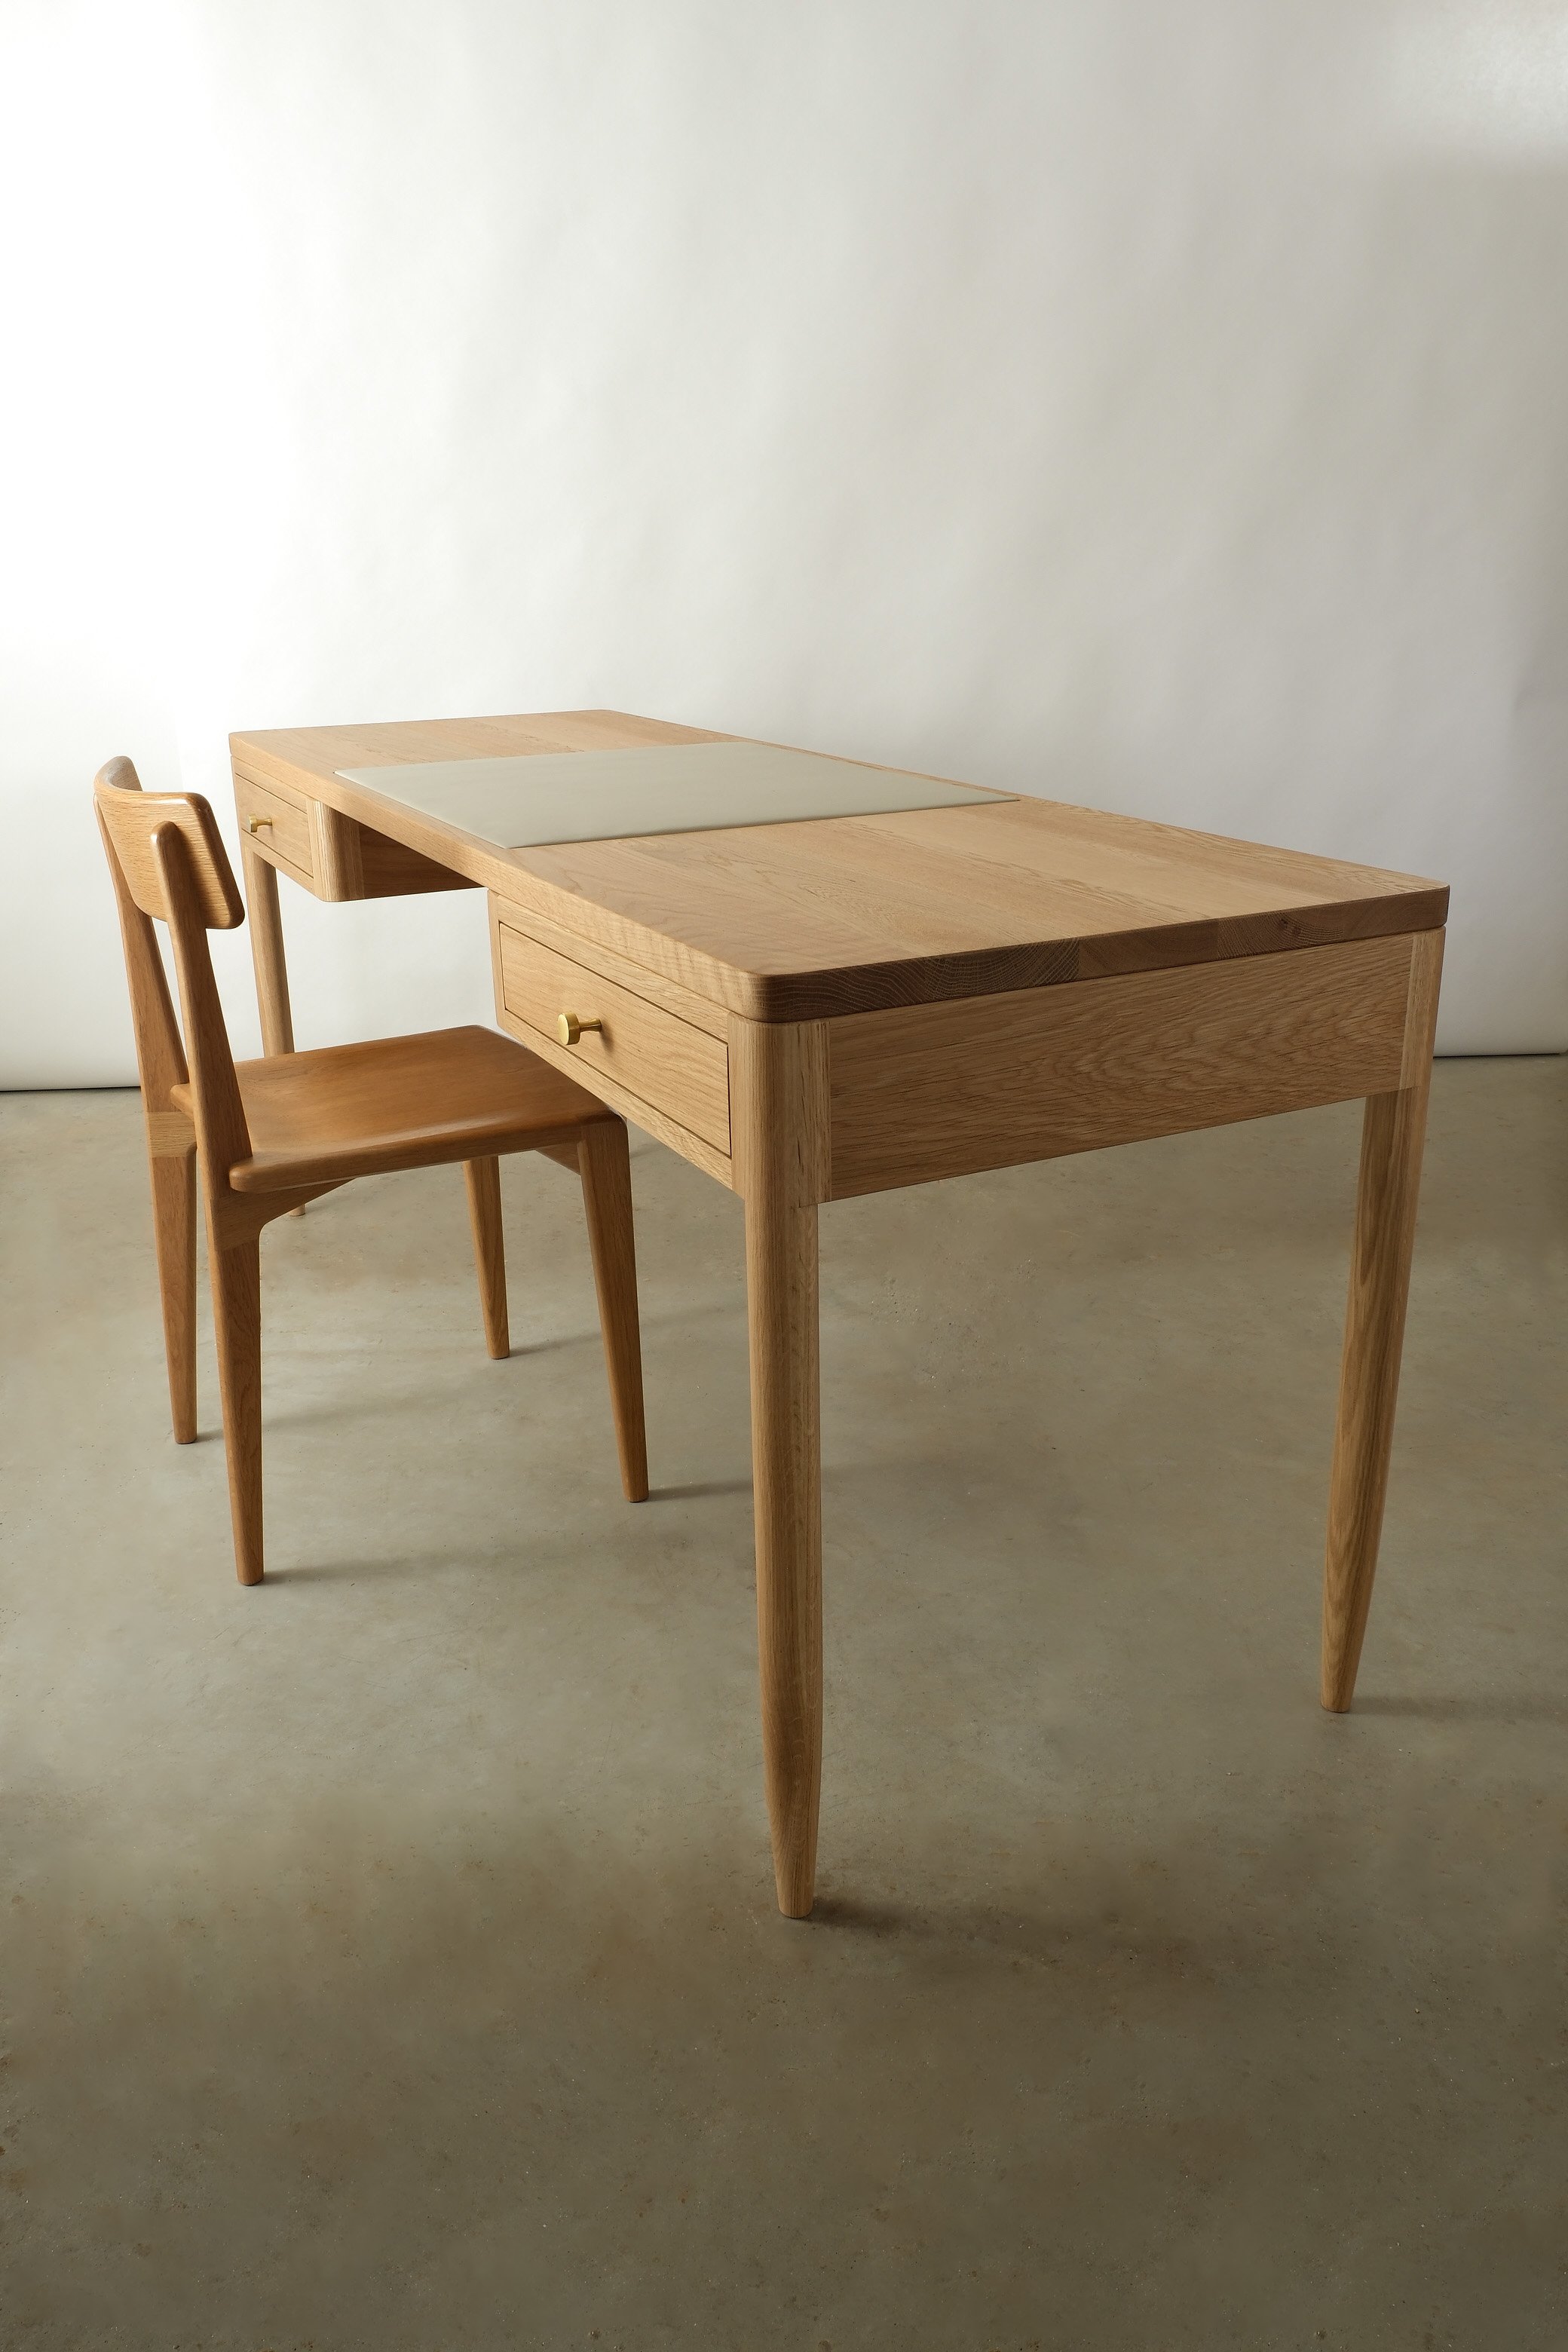 baxter table with chair, drawer closed.JPG